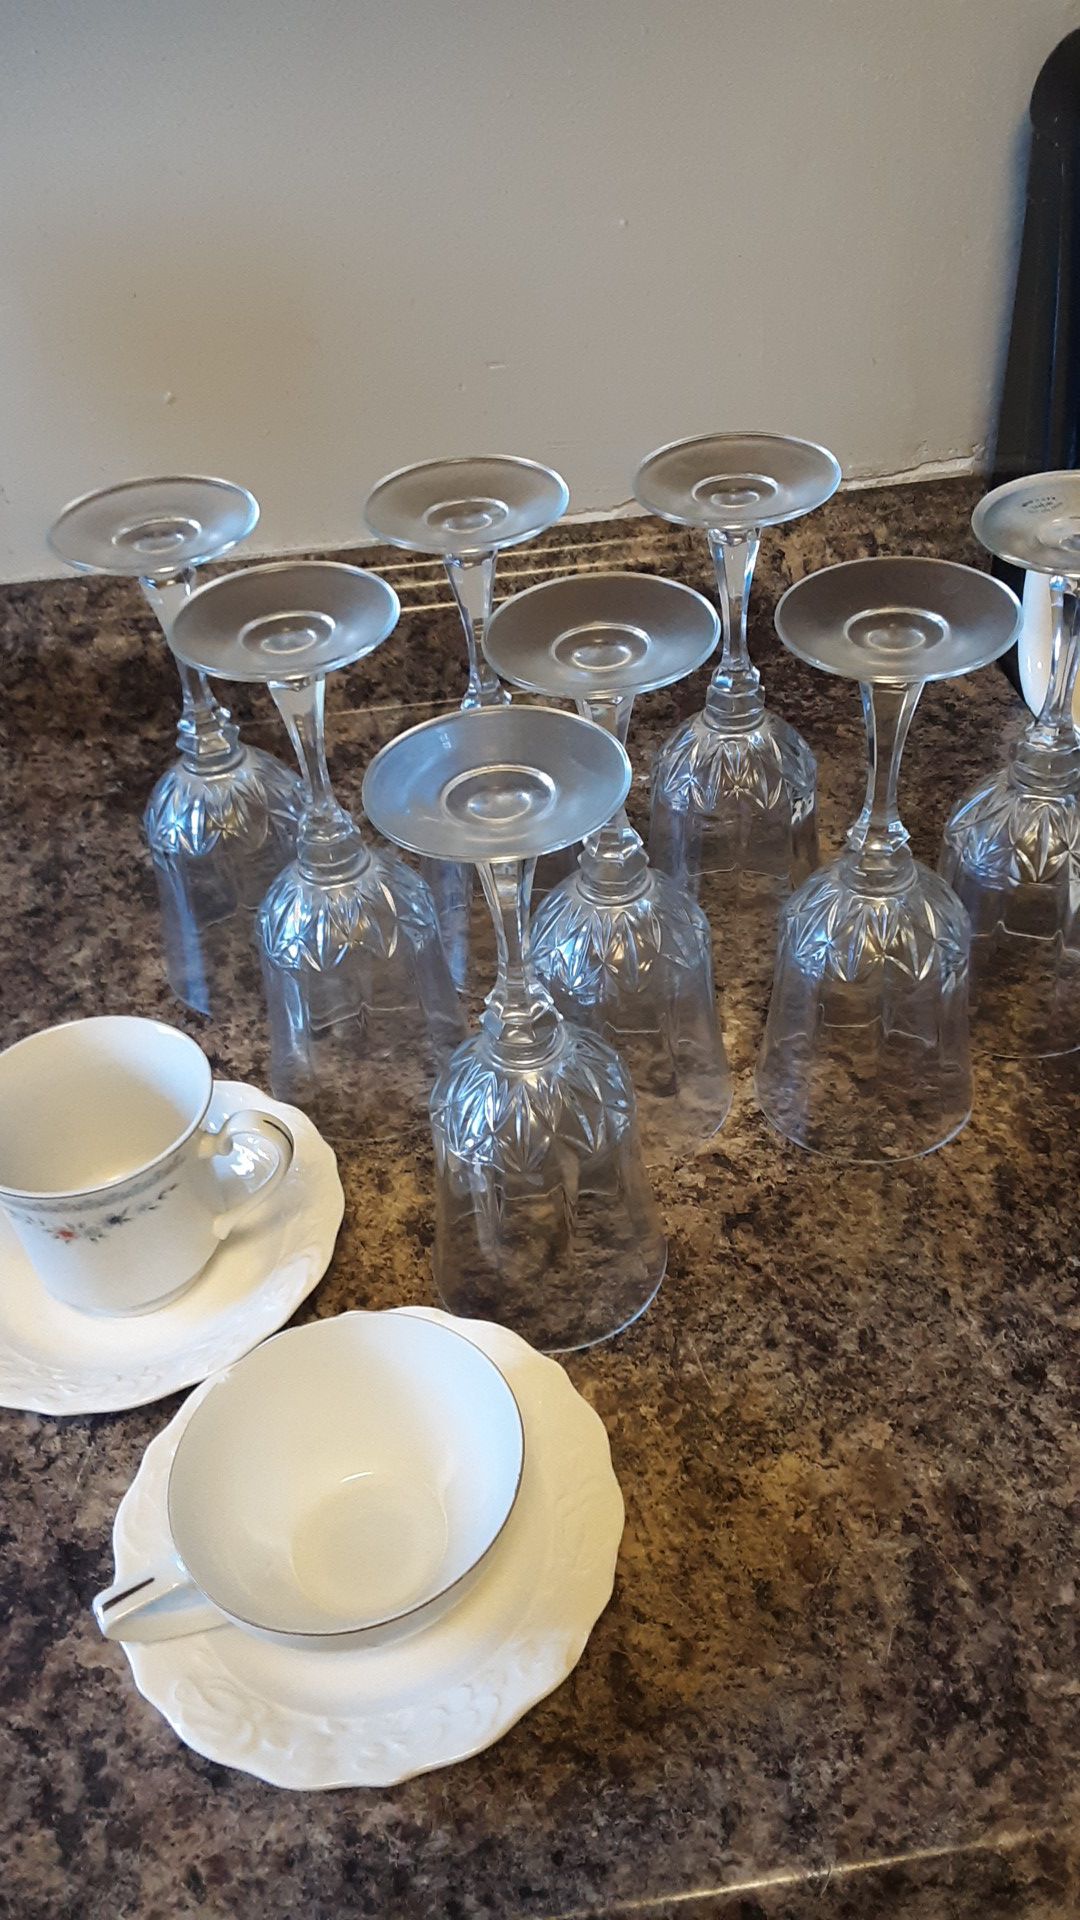 9 Wine glasses and 2 tea cups with plate